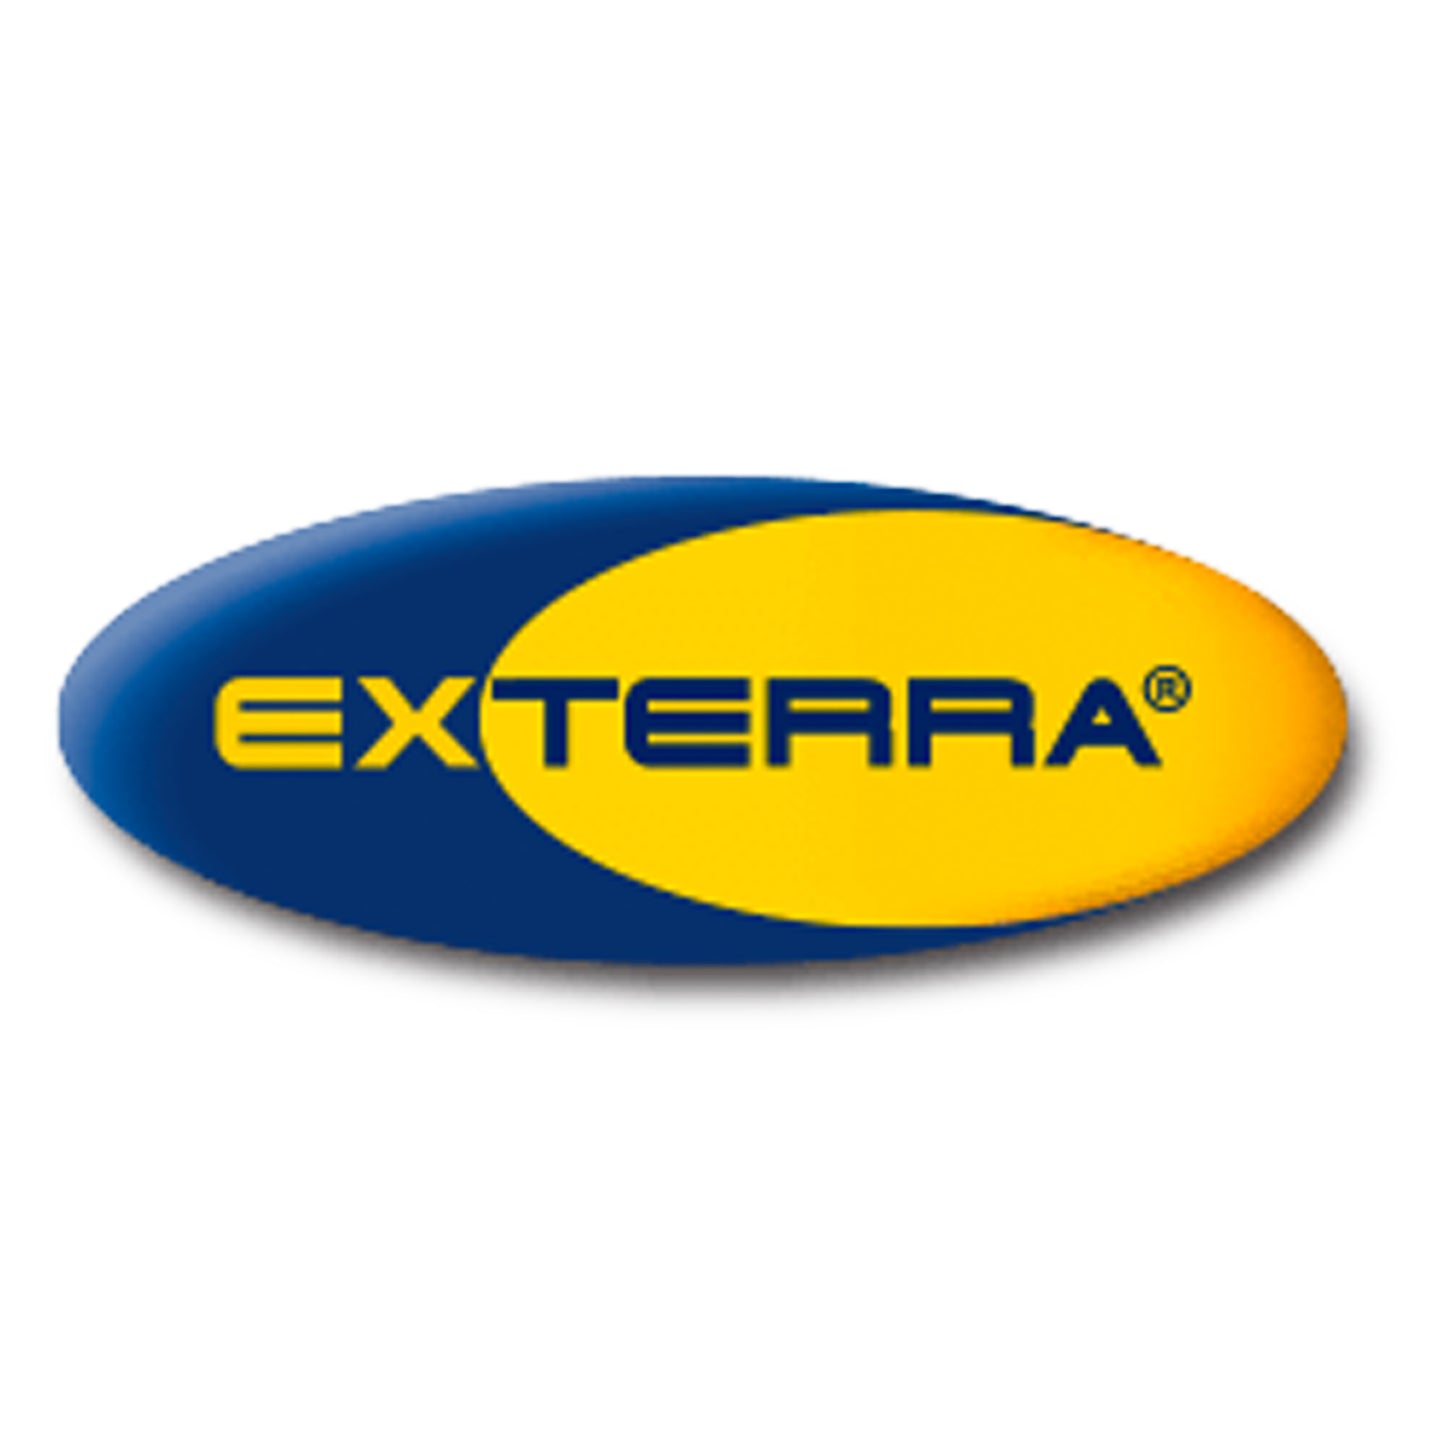 EXTERRA - AUSTRALIA'S NUMBER ONE TERMITE COLONY ELIMINATION SYSTEM